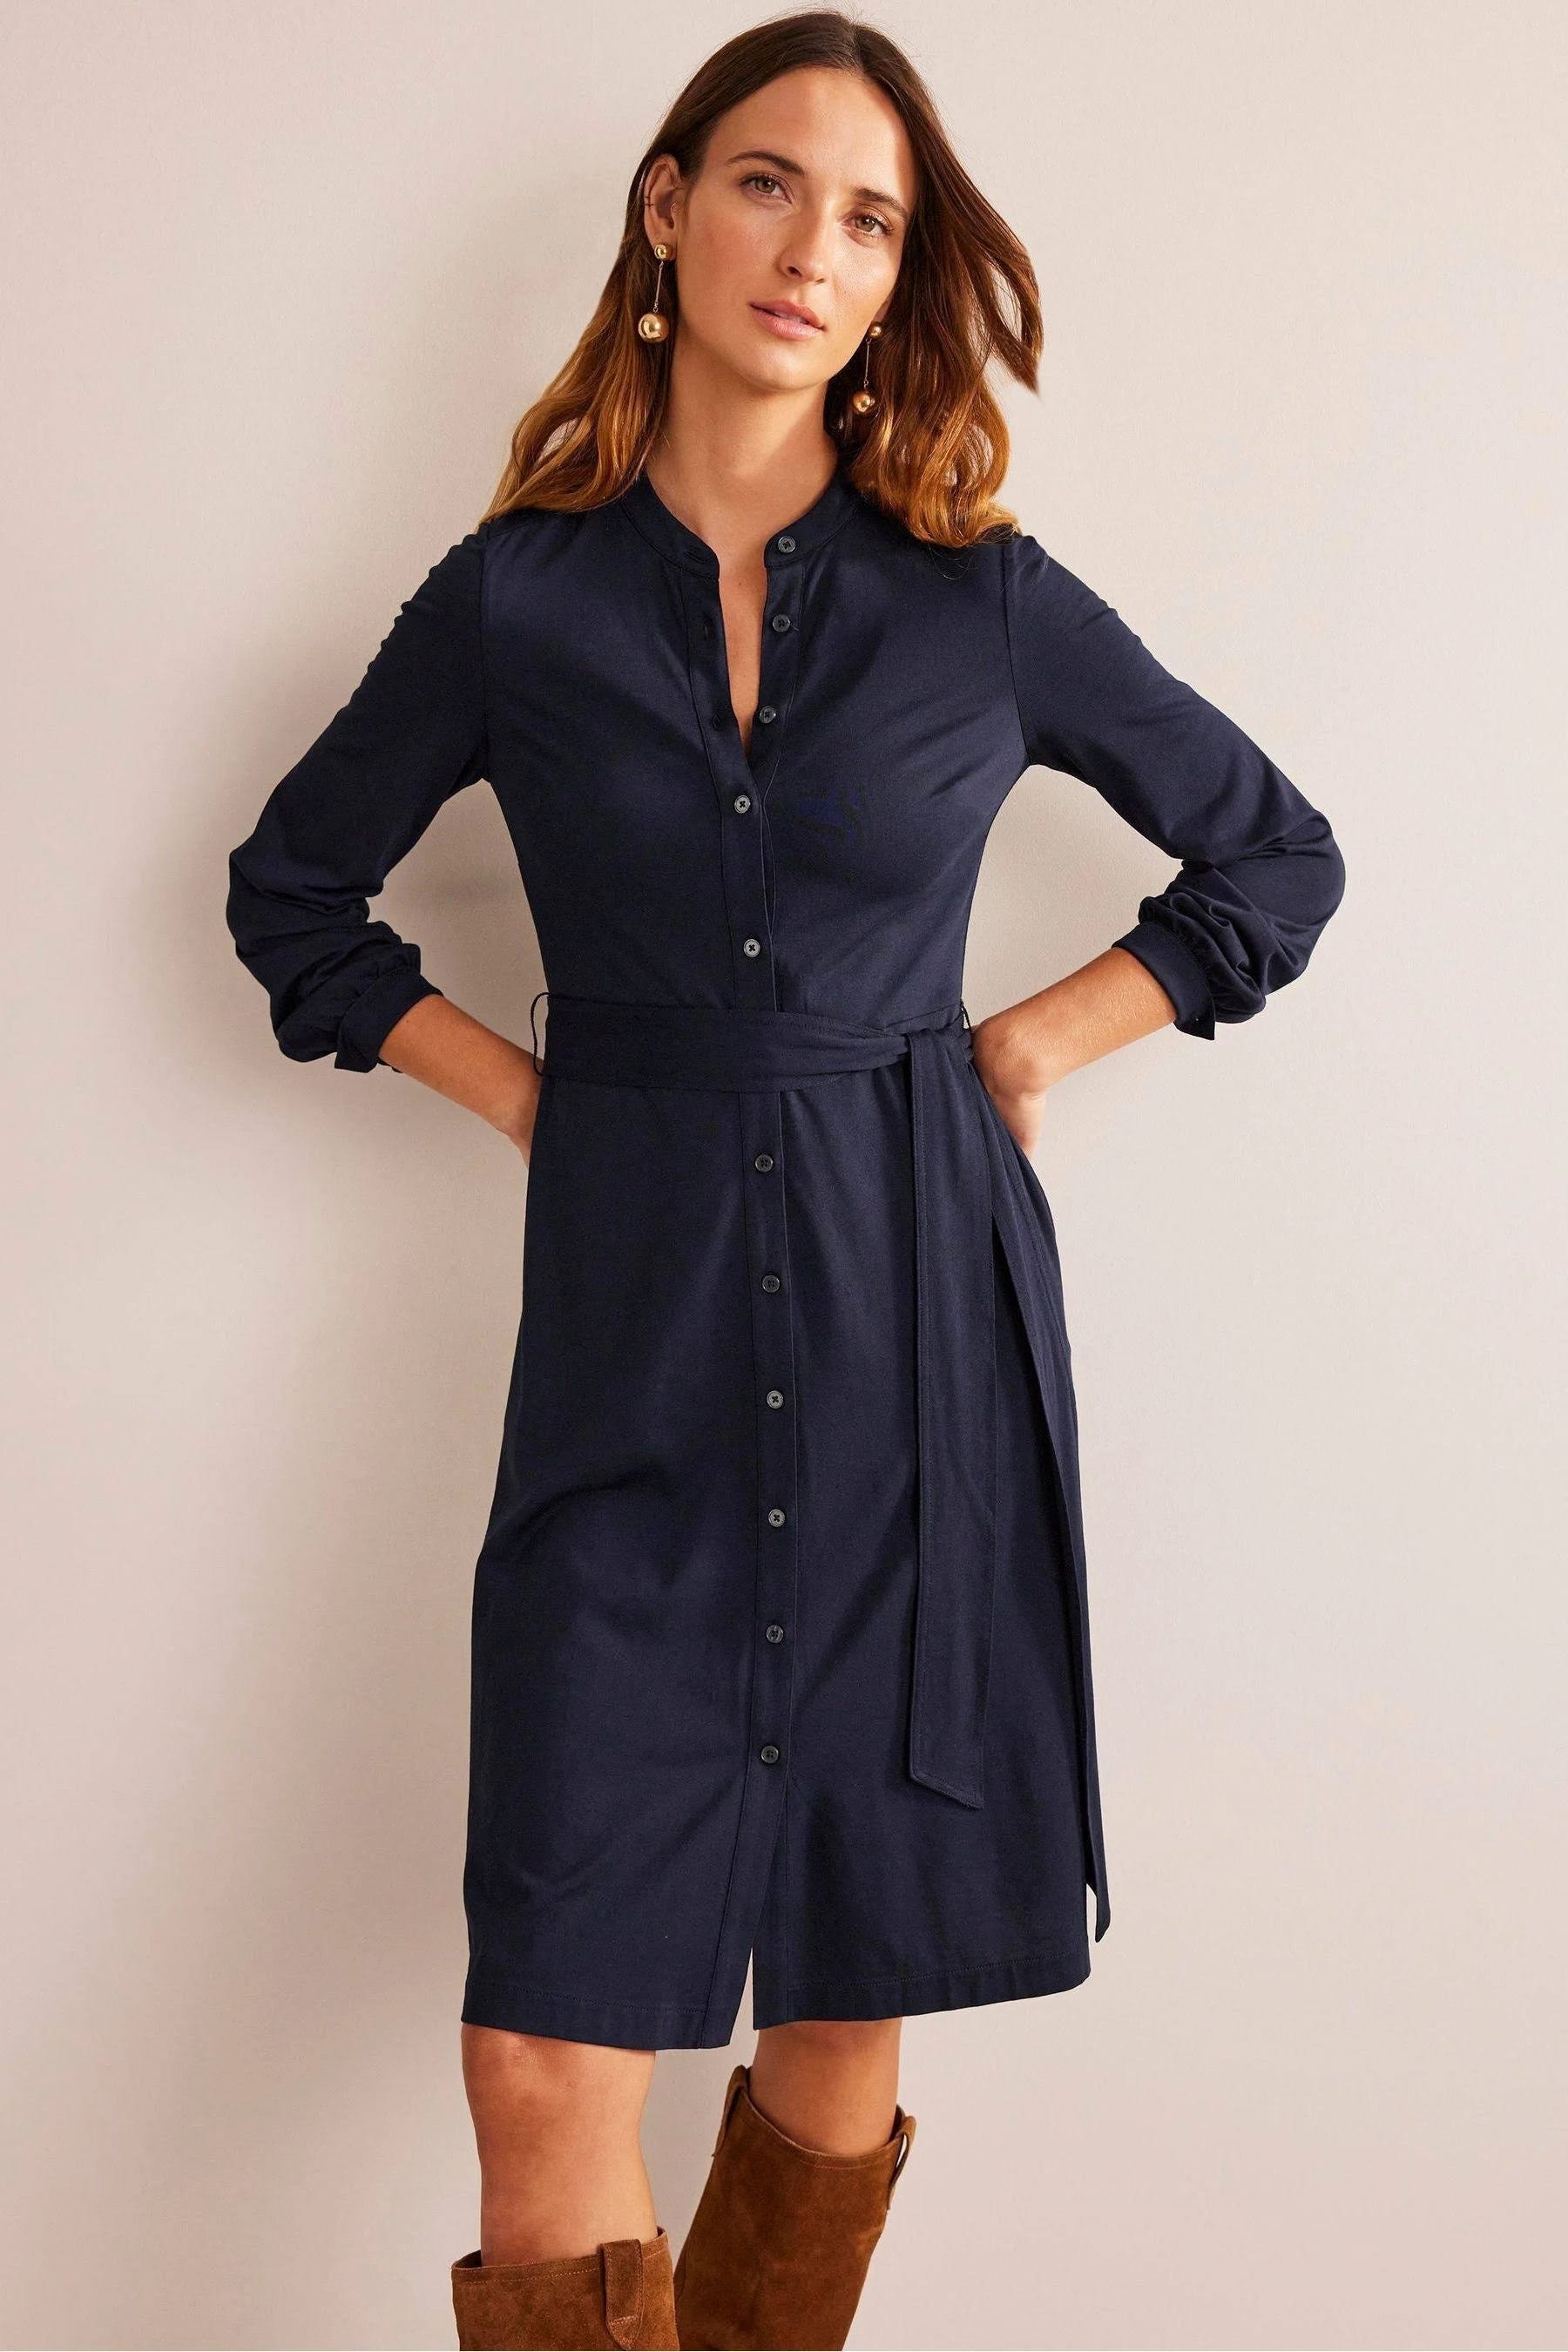 Boden's Navy Shirt Dress - Perfect for Transitional Seasons | Image